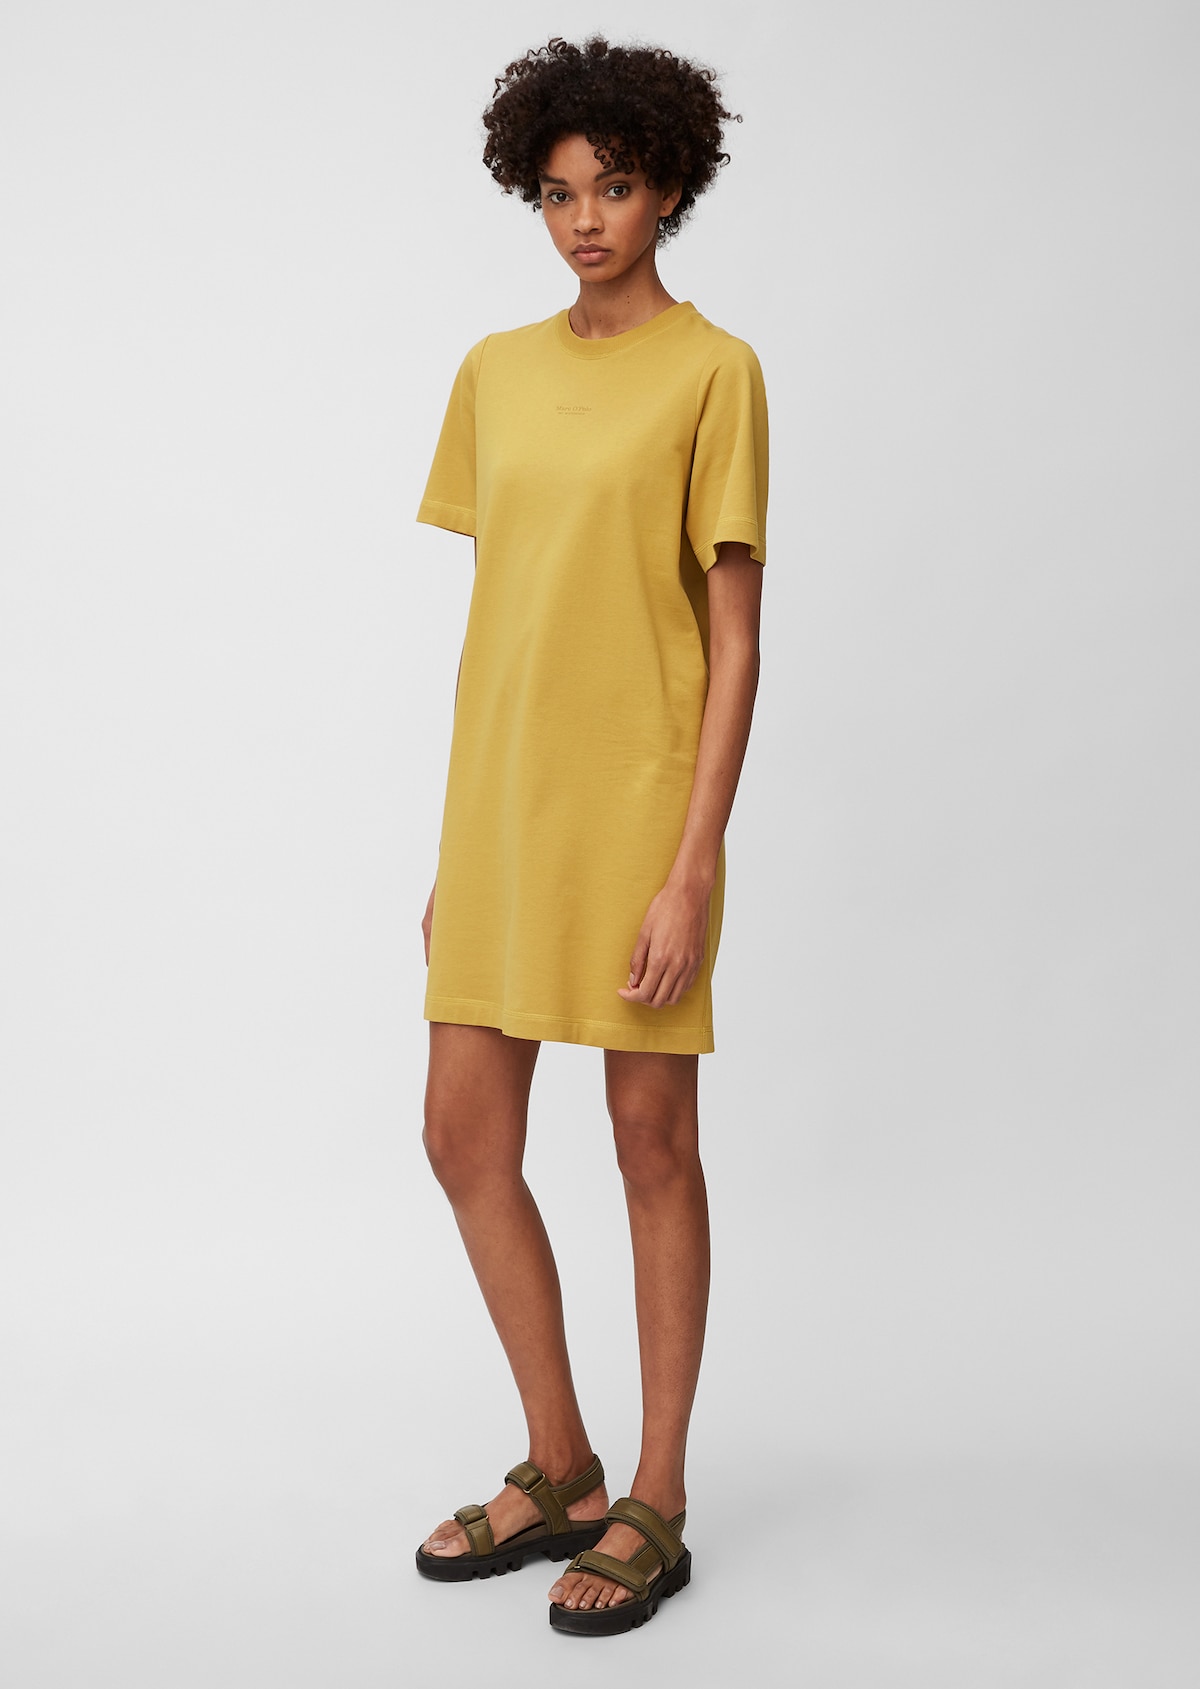 Sweatshirt dress made with SeaCell™LT Lyocell - yellow | Summer dresses ...